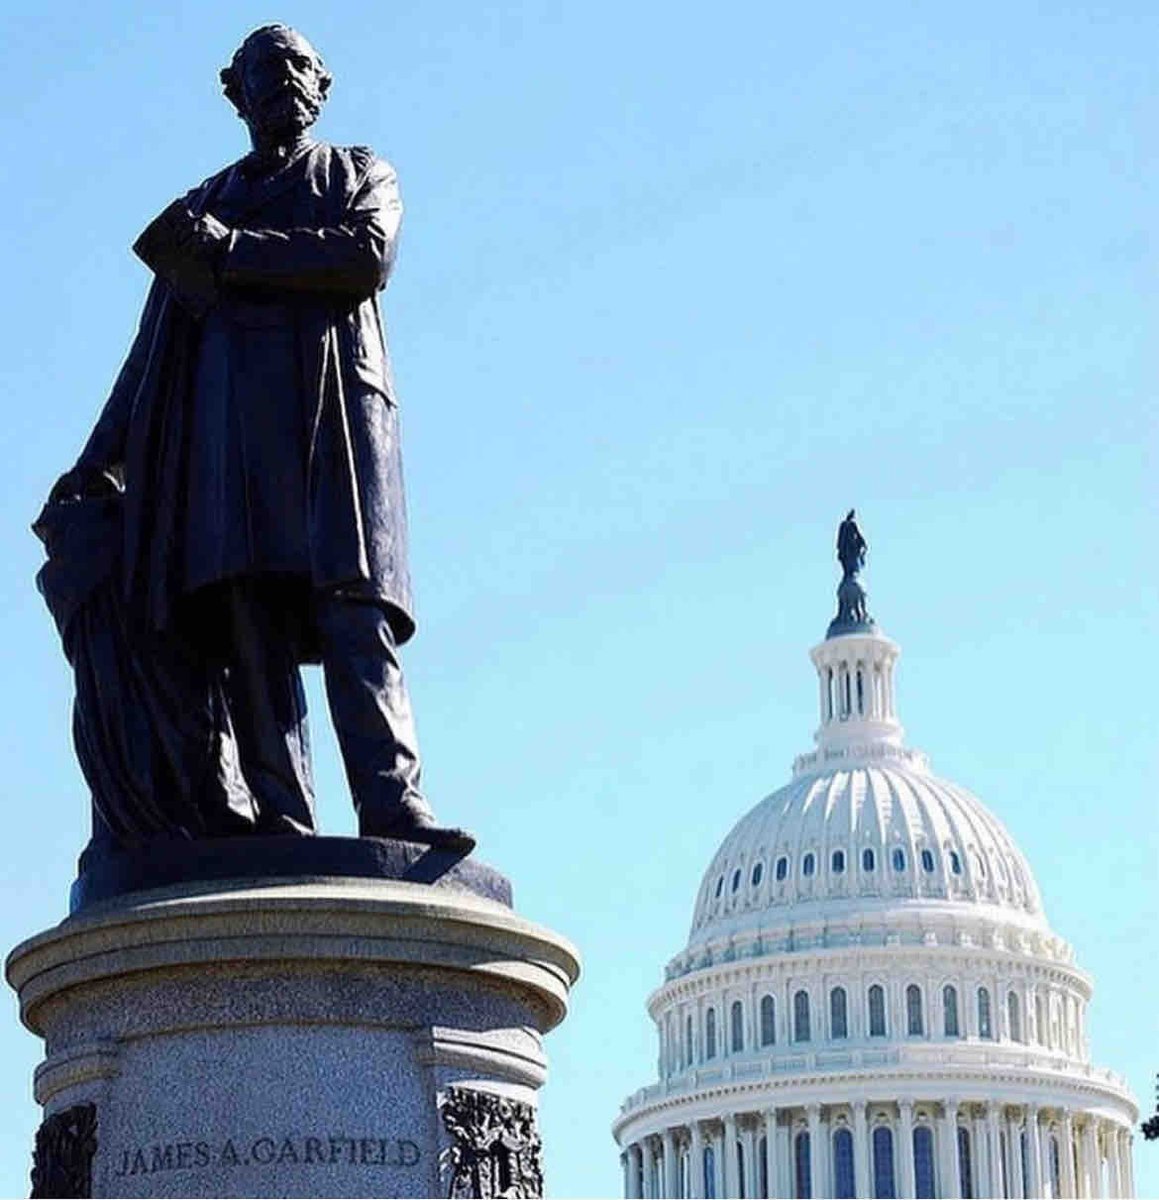 This statue of James A. Garfield stands near the U.S. Capitol in Washington, D.C. It was sculpted by John Quincy Adams Ward and was dedicated on May 12, 1887 (137 years ago tomorrow). #jamesagarfield #washingtondc #uscapitol #jamesagarfieldnhs